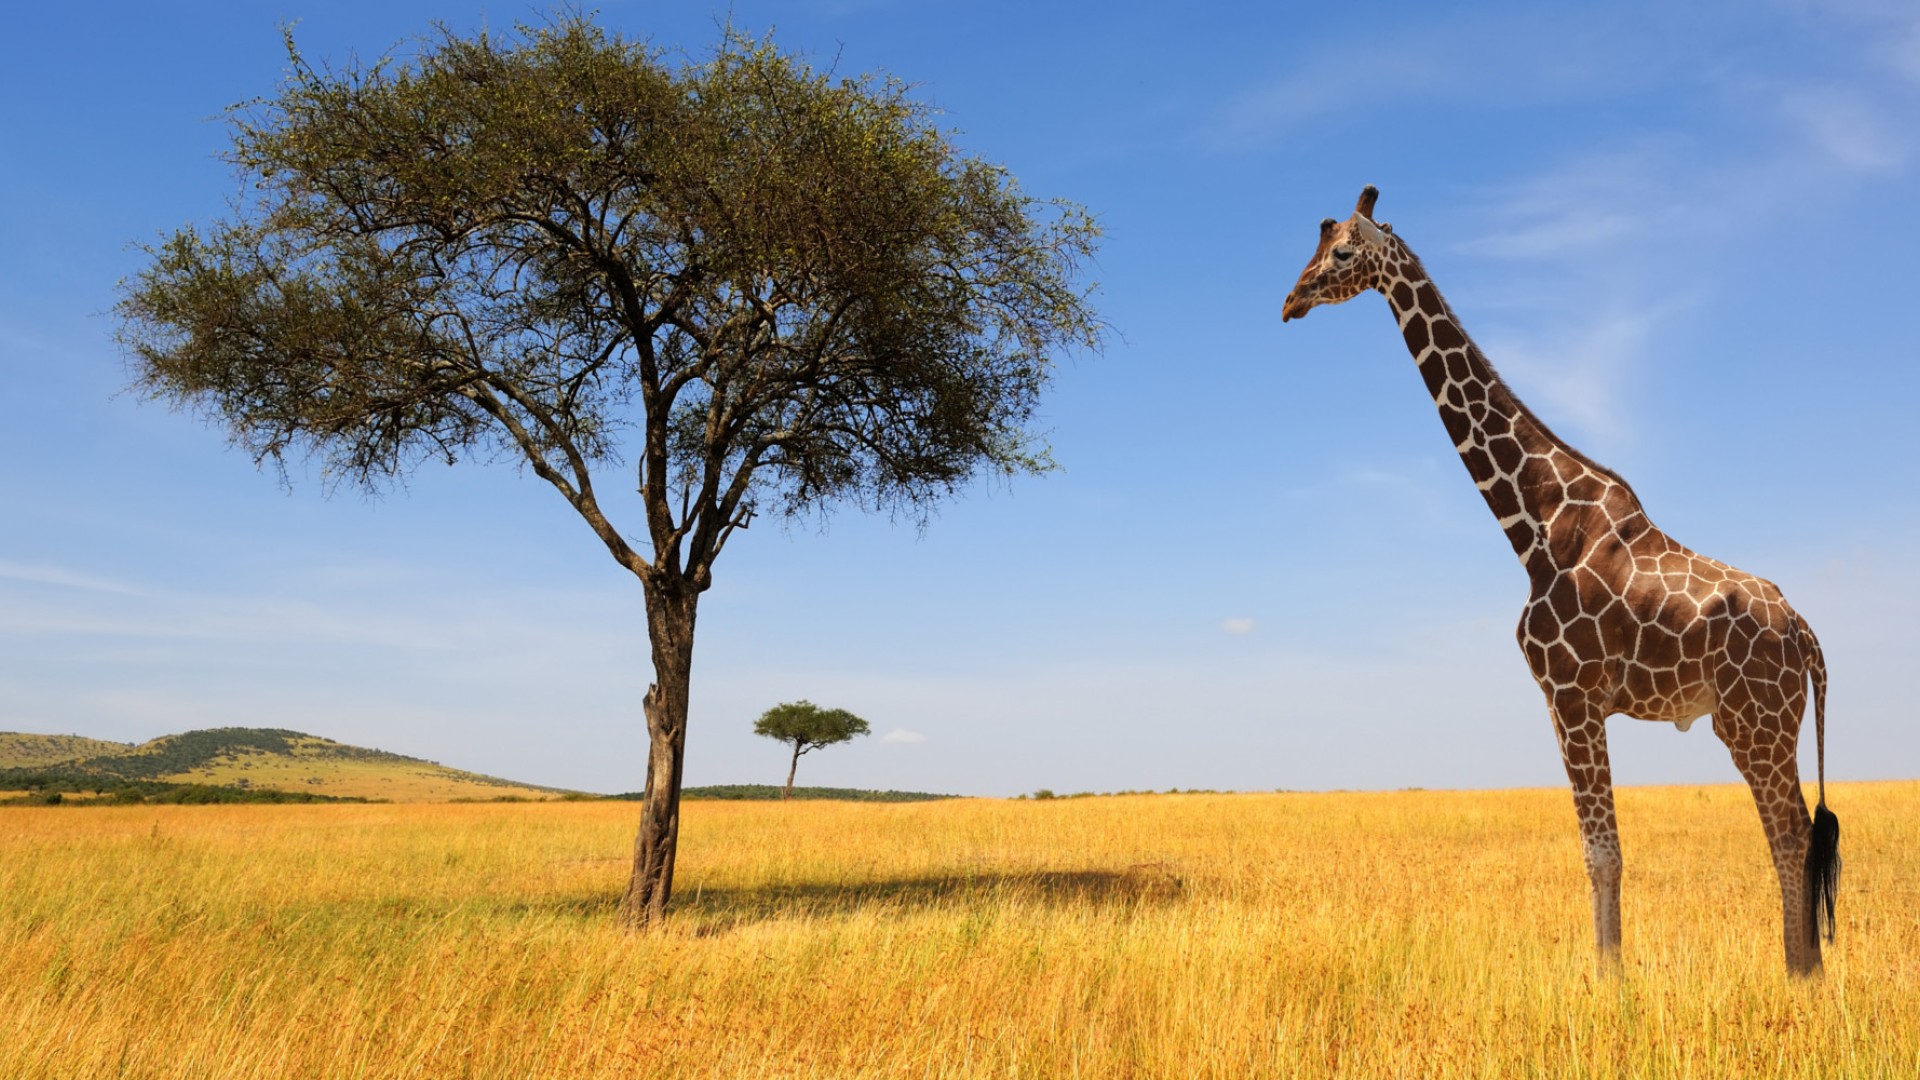 Giraffe walking through tall grass next to a tree at equal height in South Africa